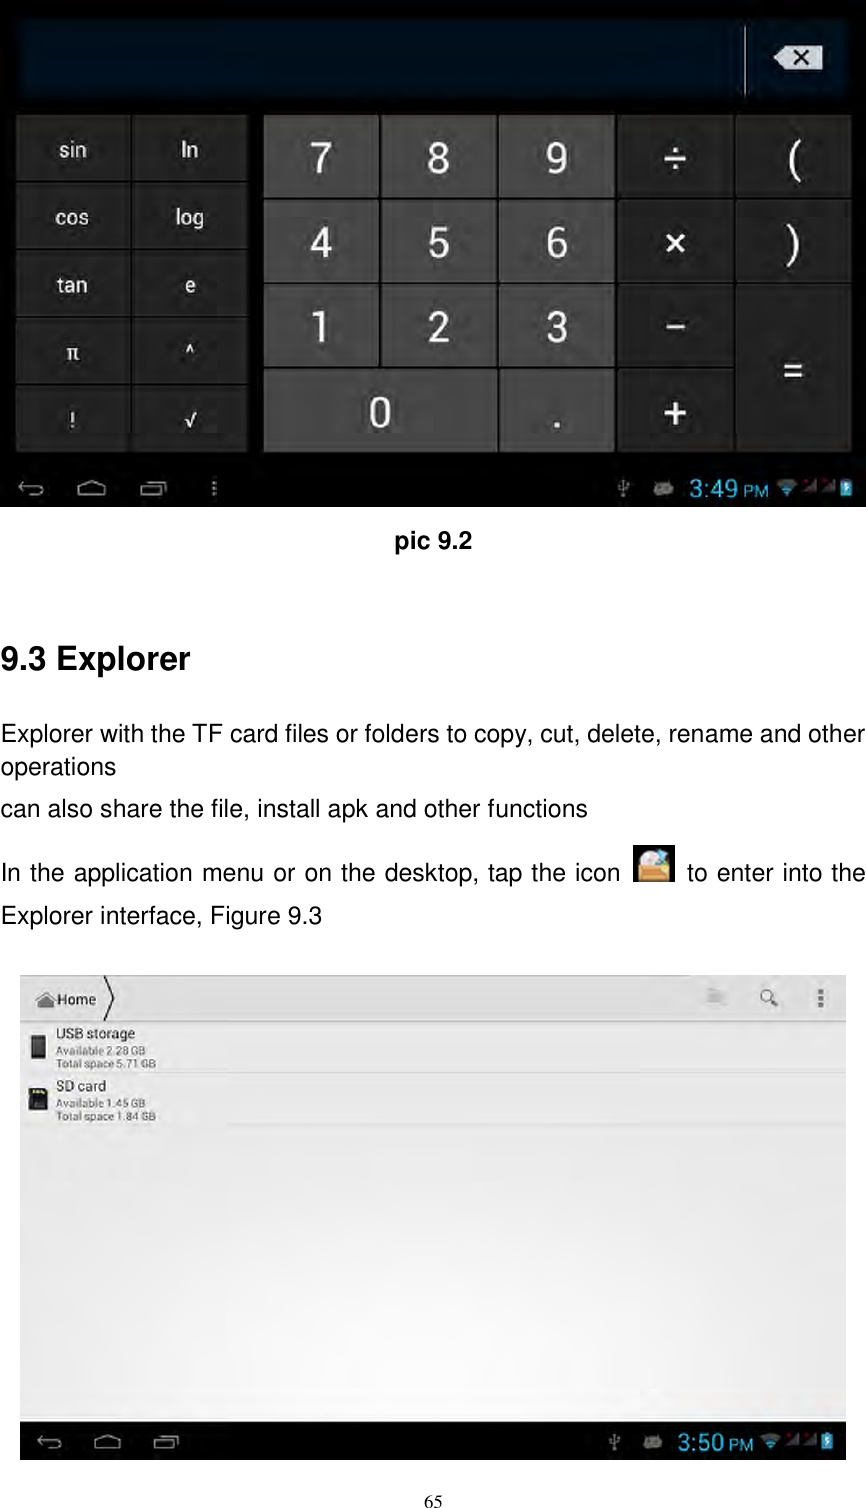      65  pic 9.2  9.3 Explorer Explorer with the TF card files or folders to copy, cut, delete, rename and other operations can also share the file, install apk and other functions In the application menu or on the desktop, tap the icon    to enter into the Explorer interface, Figure 9.3   